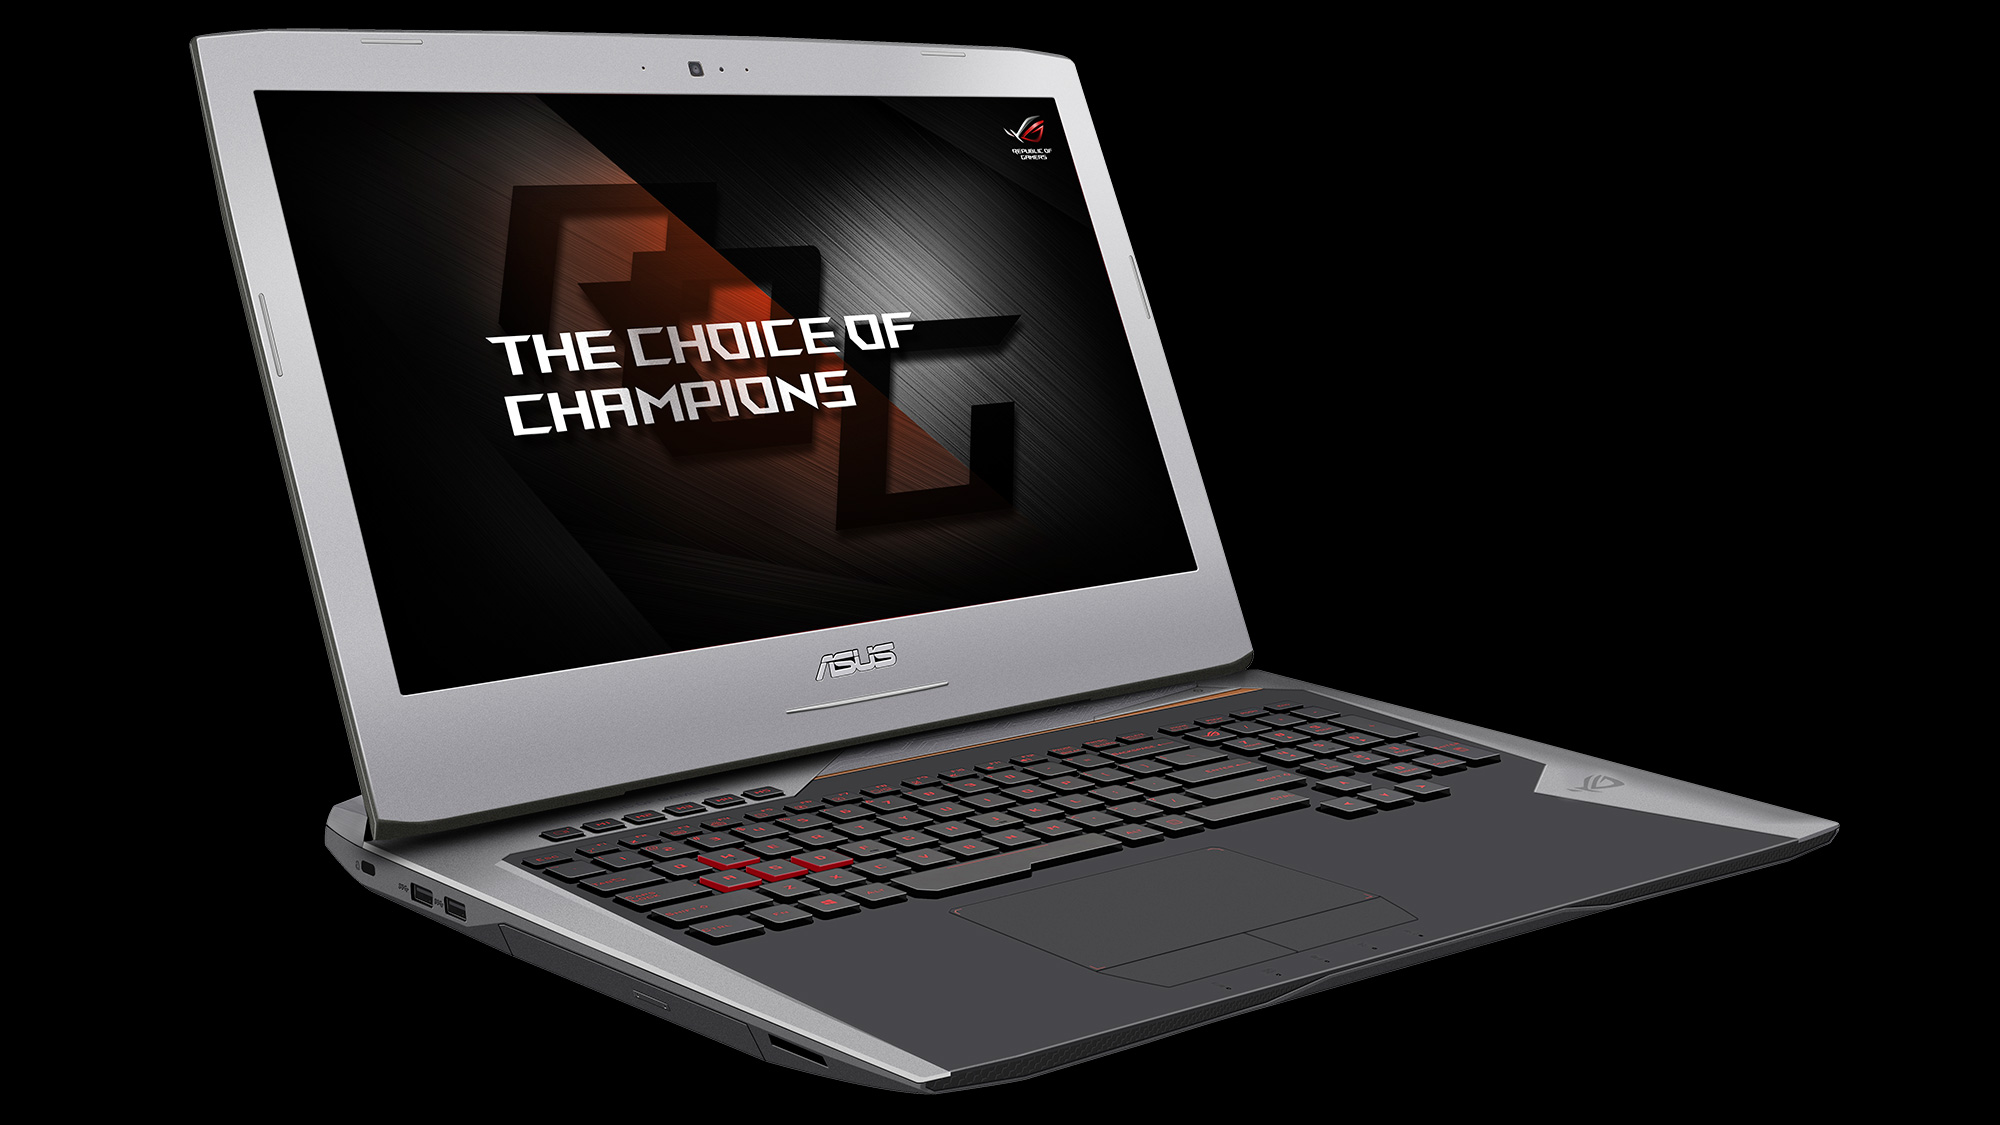 ROG Announces Gaming Laptops with NVIDIA GTX 10-Series Graphics Cards